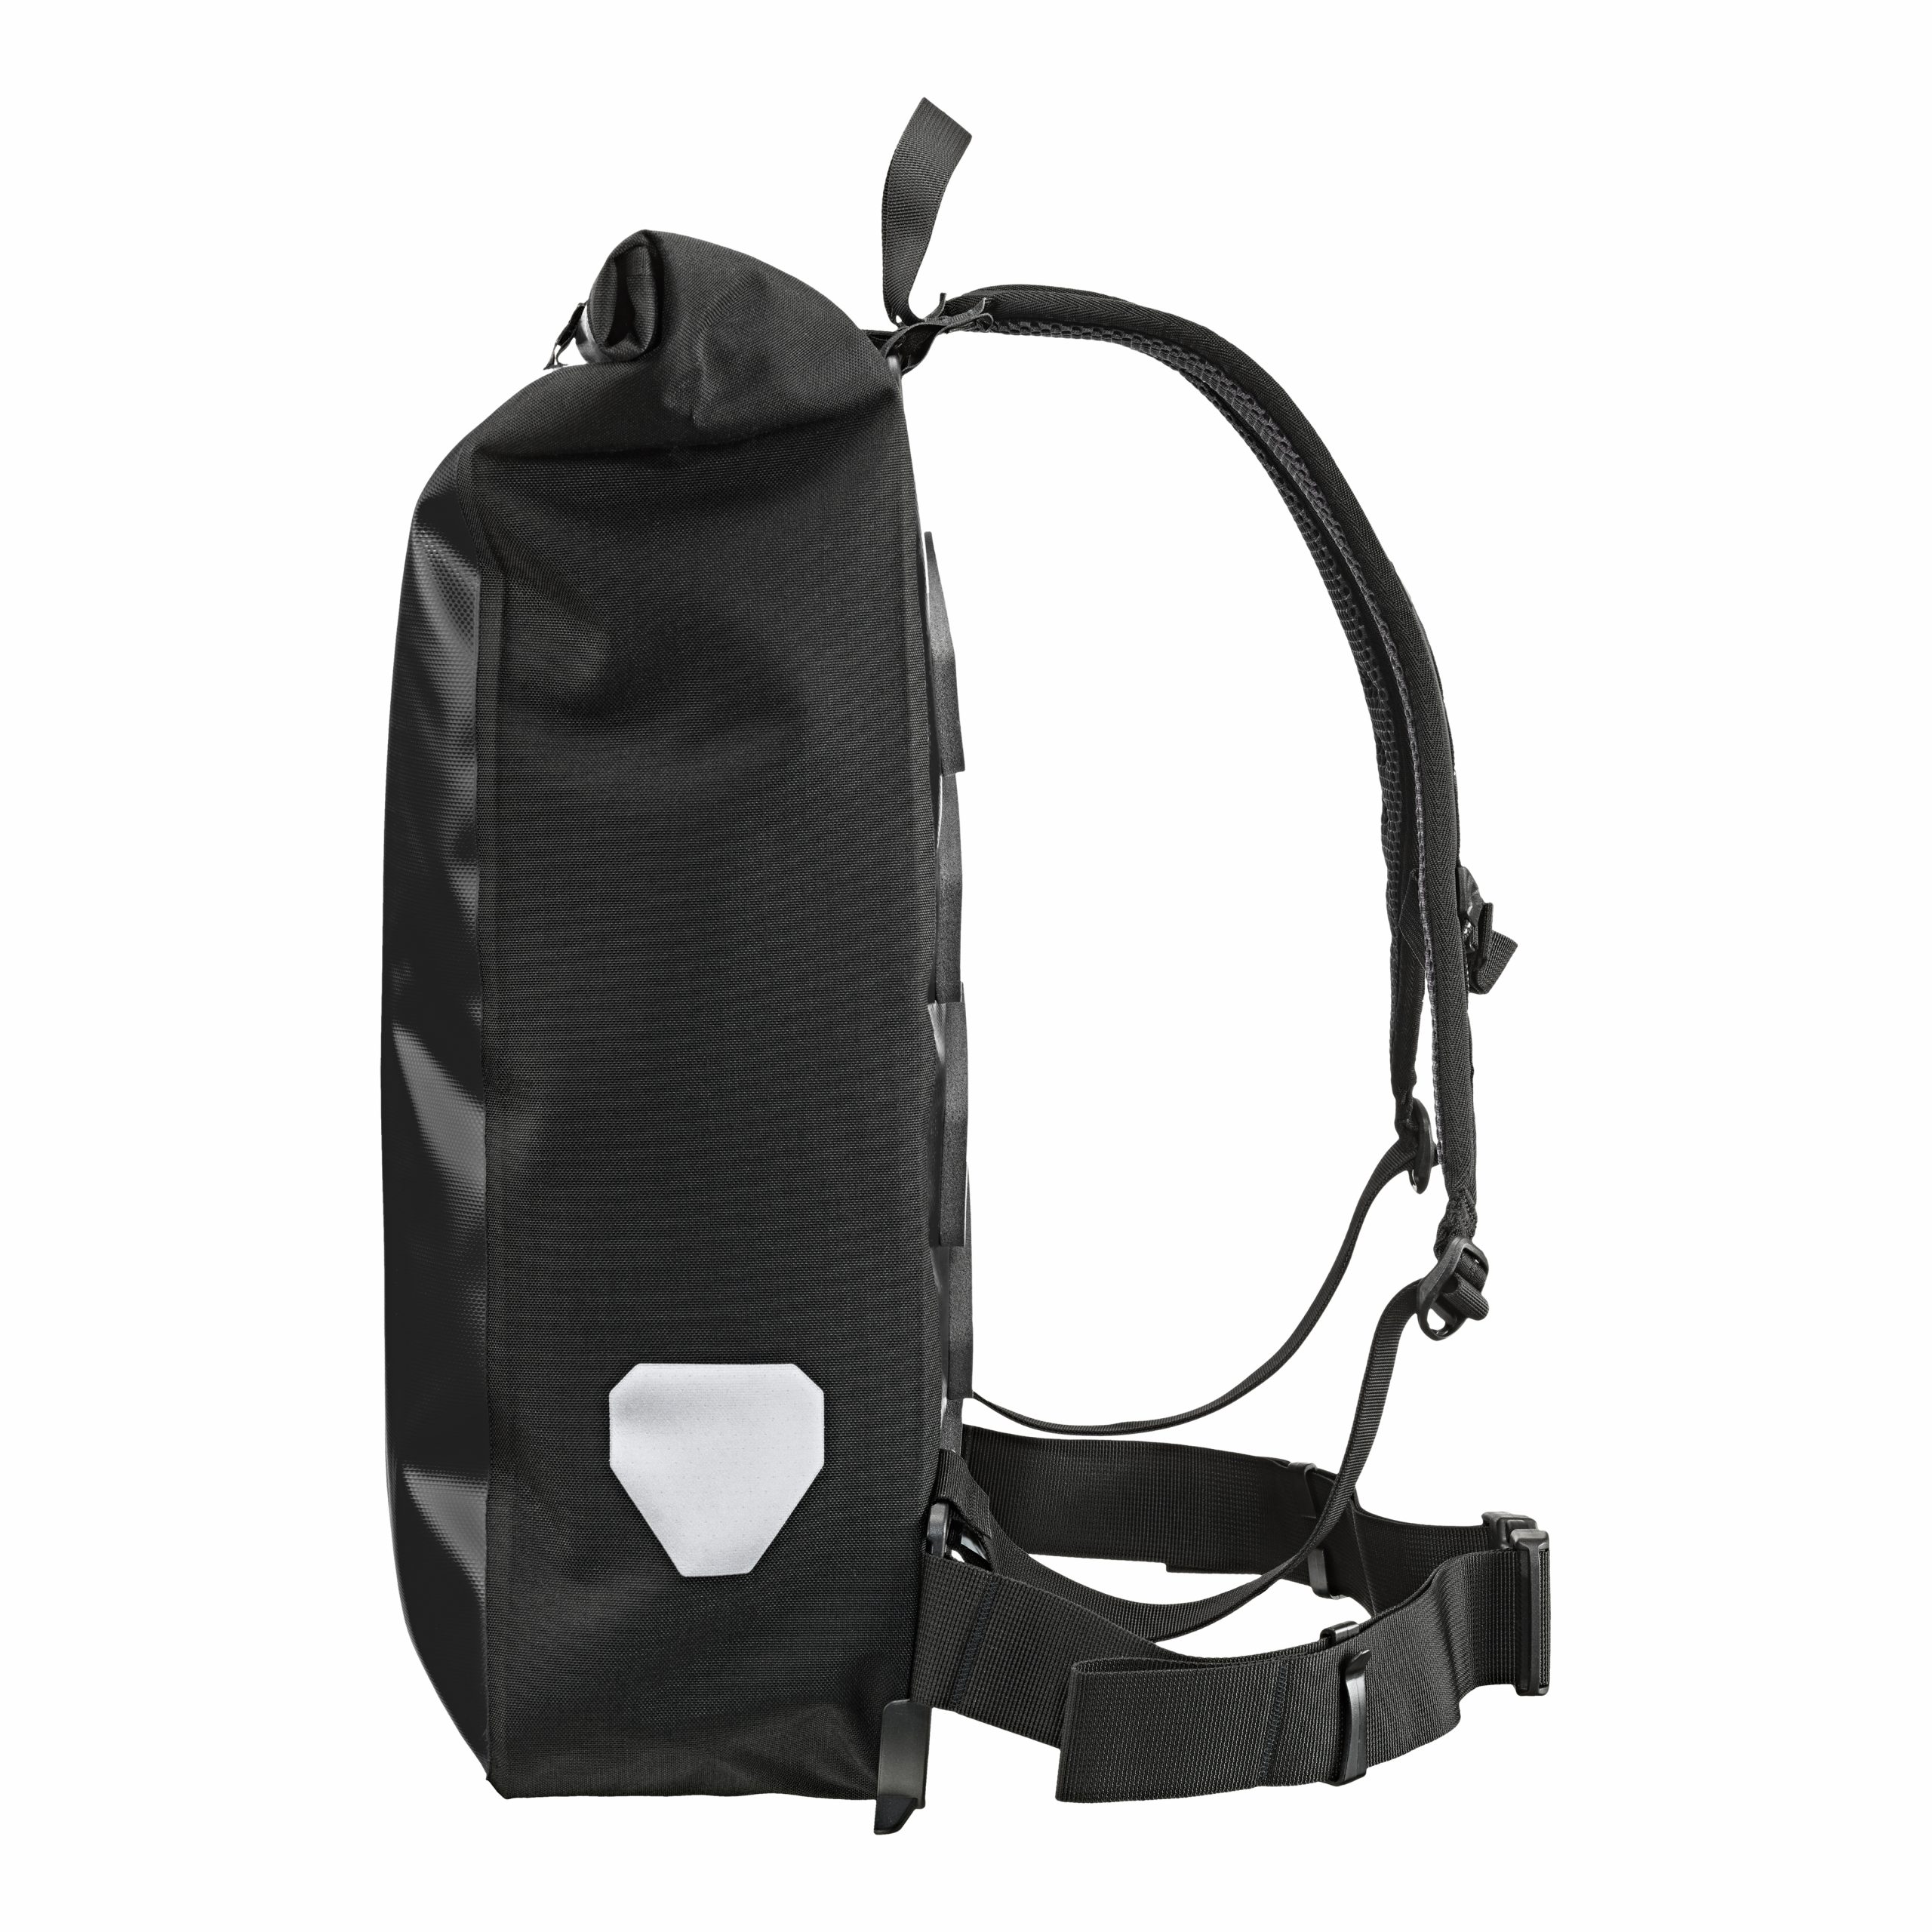 ORTLIEB Velocity Messenger Style Daypack now from £115.00